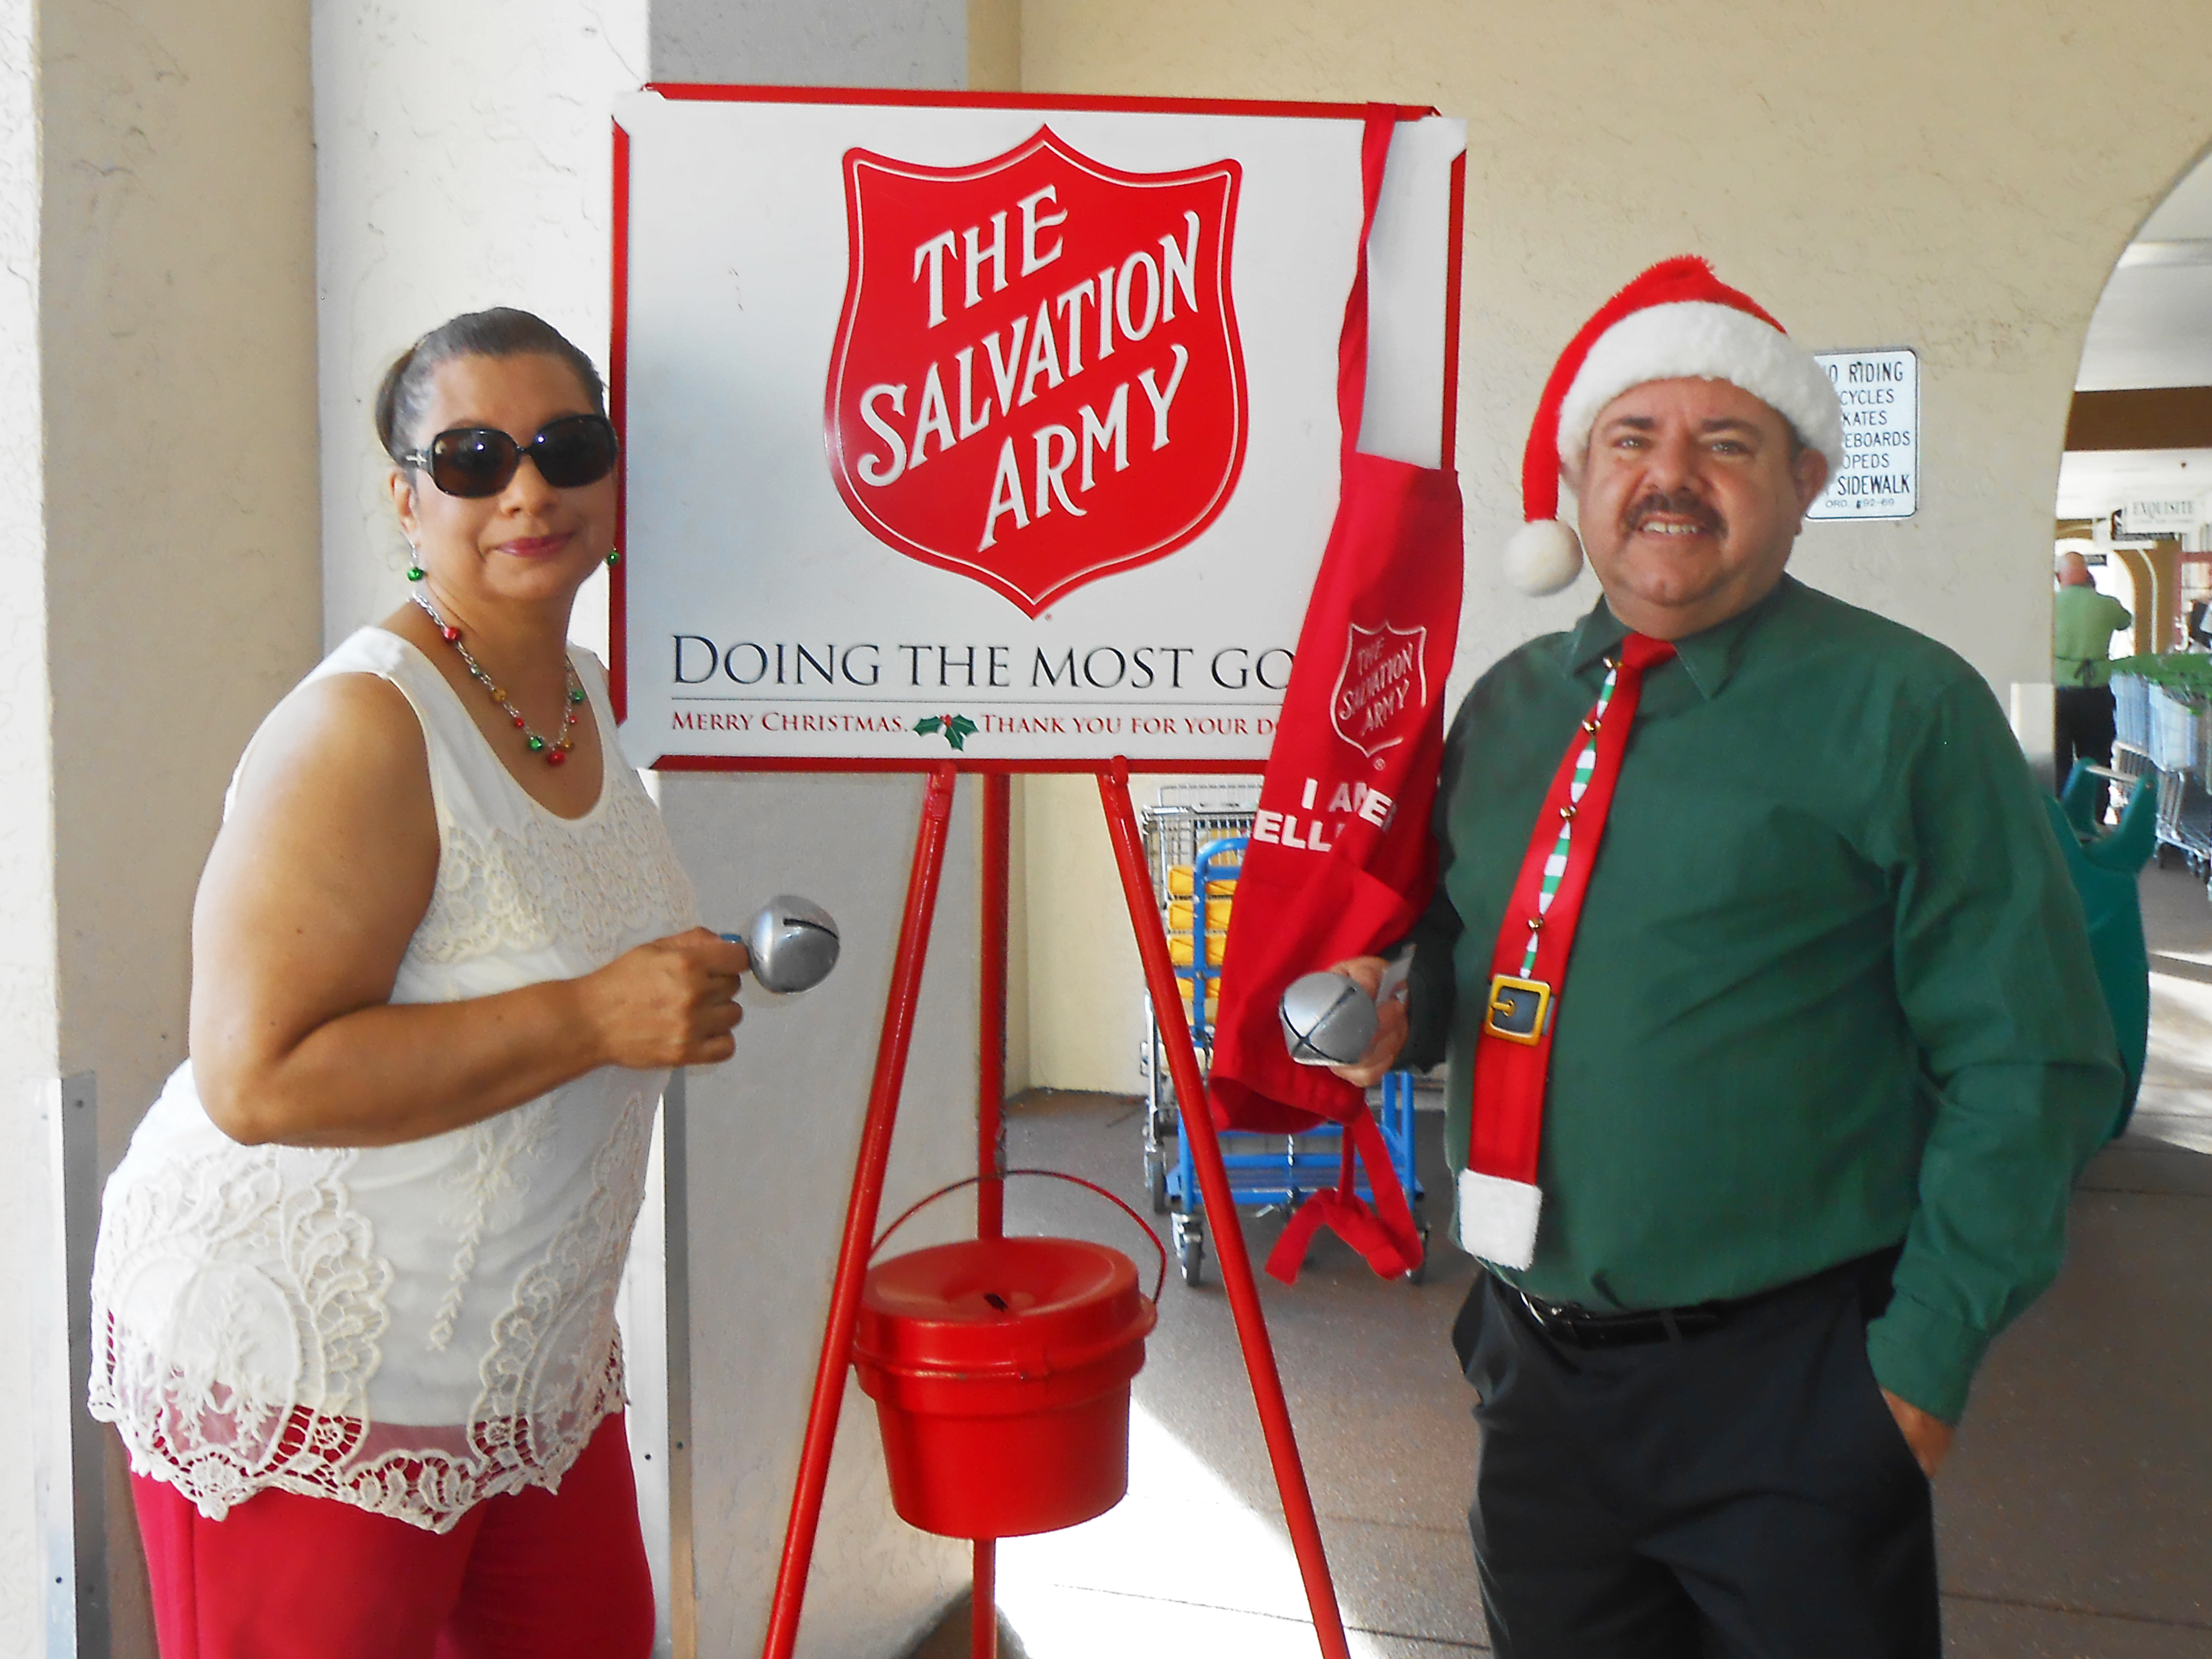 Participants in front of The Salvation Army Christmas donation location